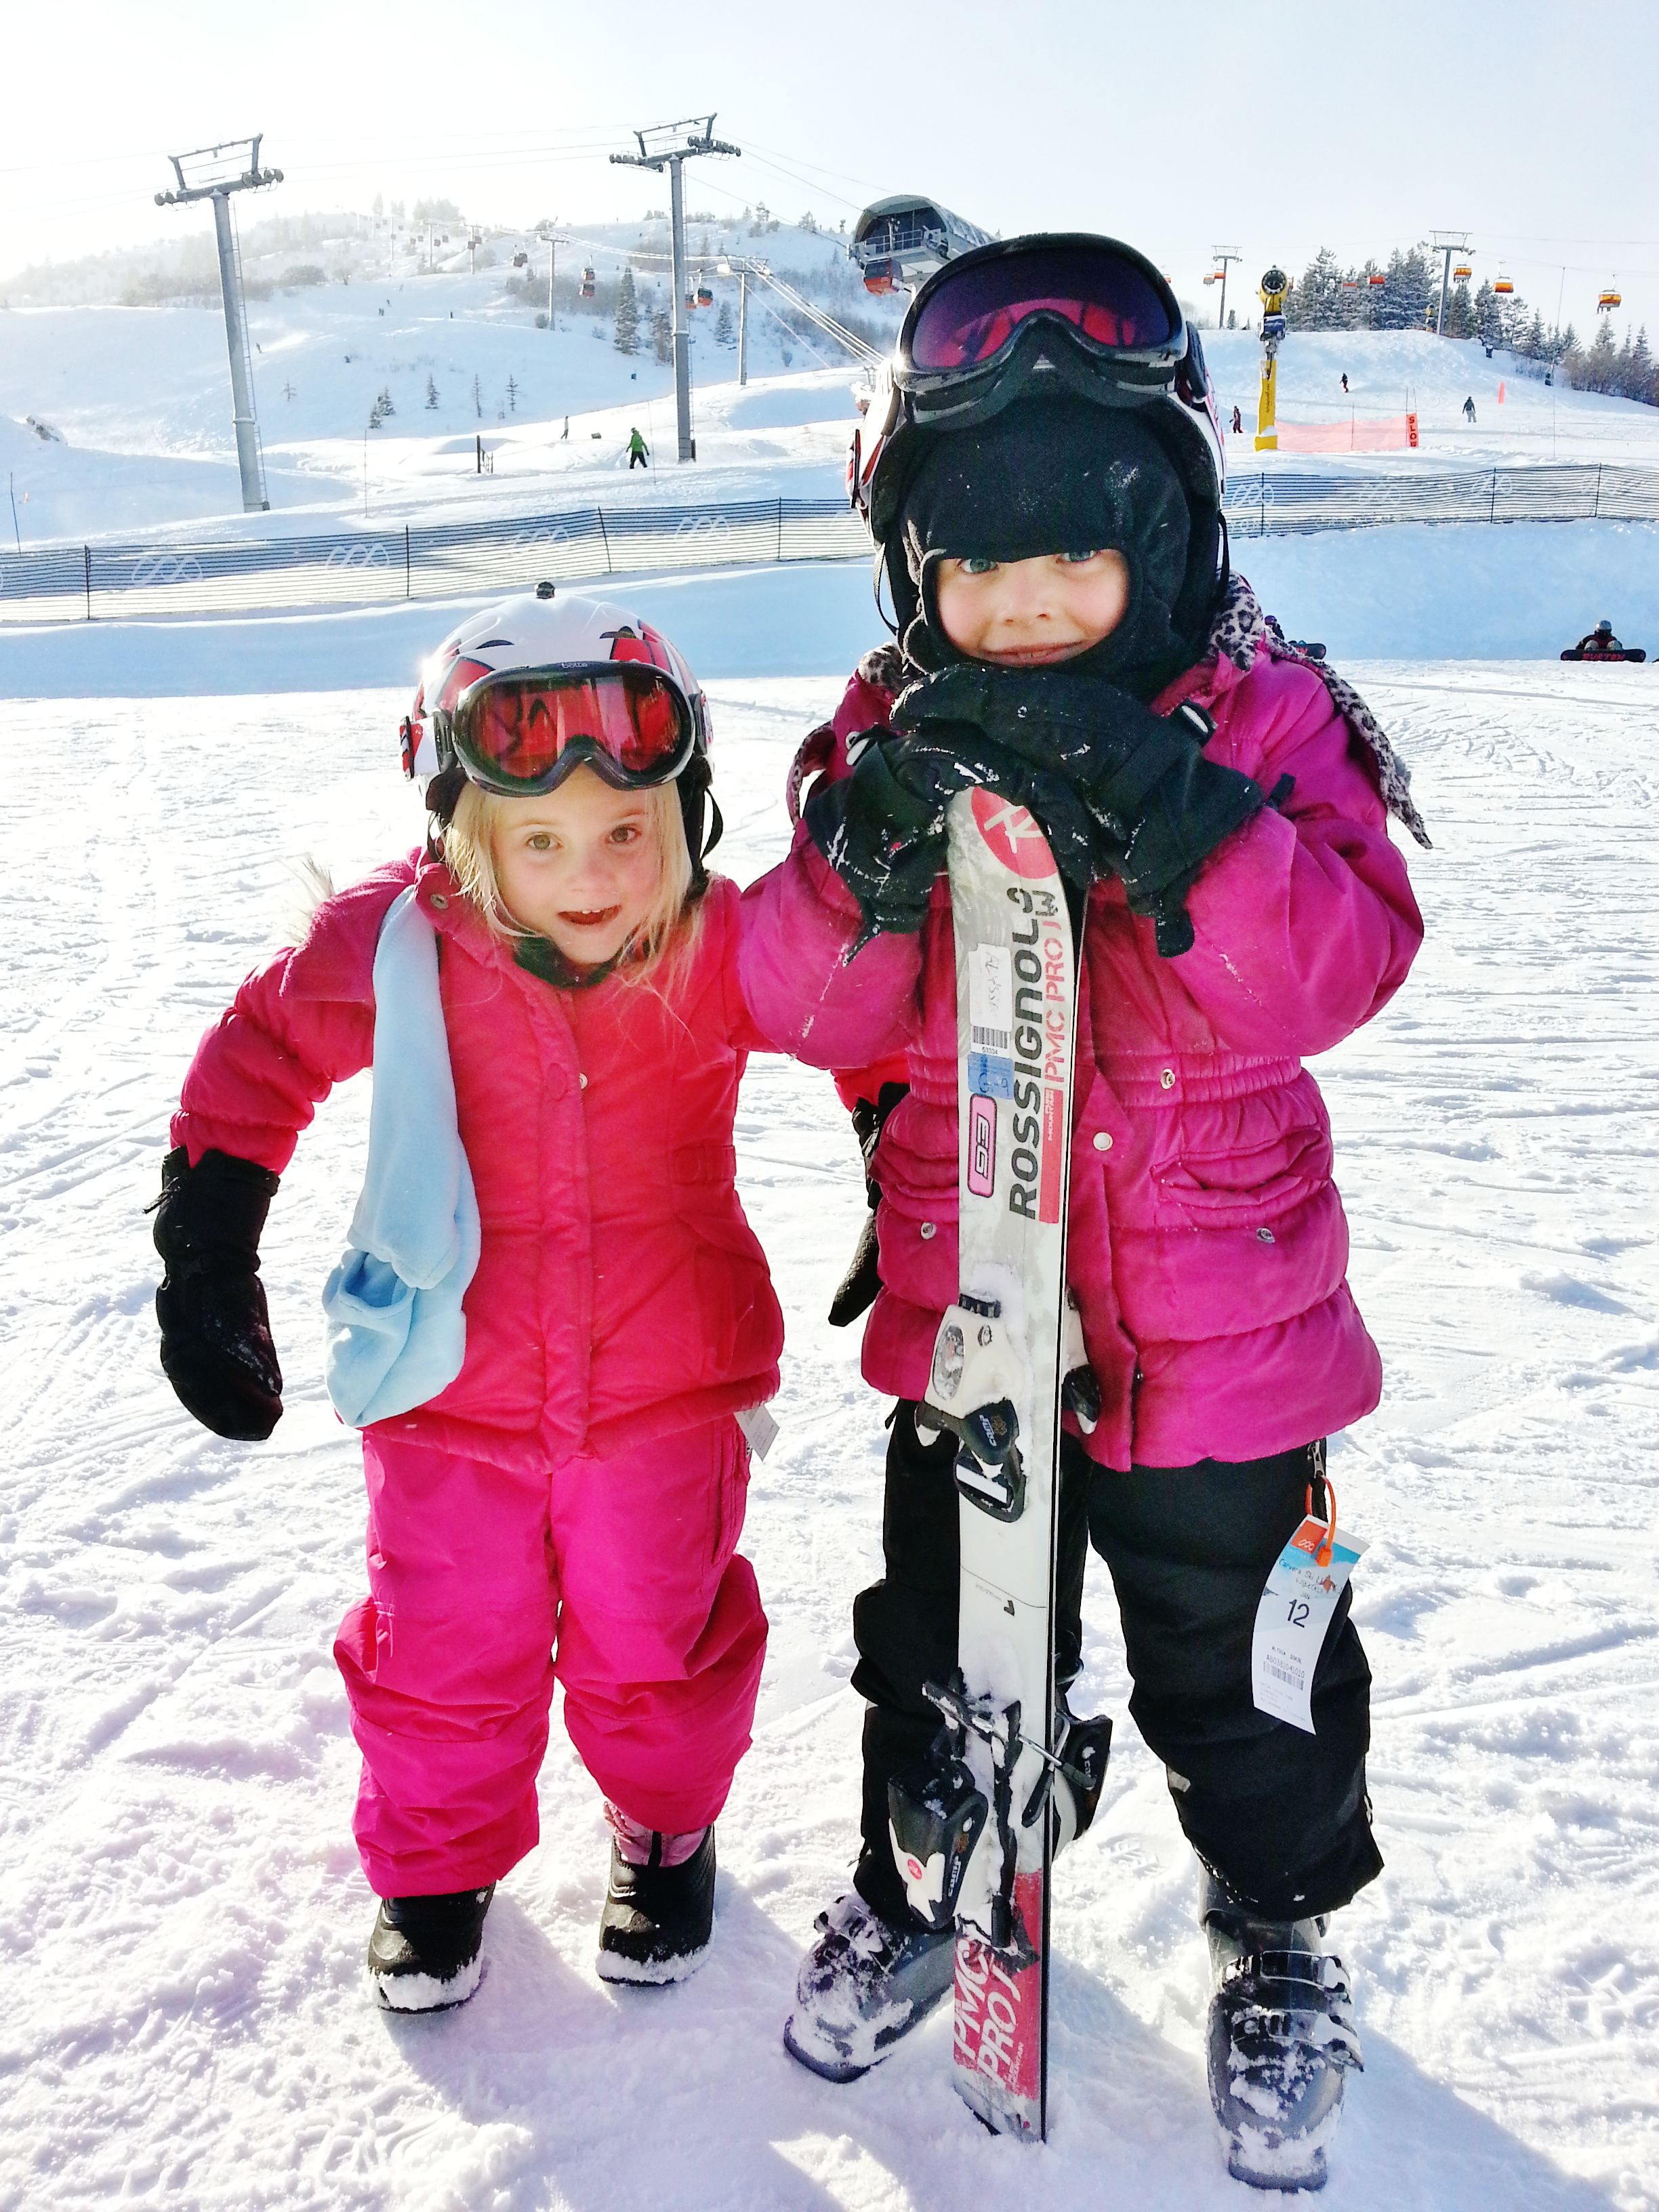 When is the right age to learn to ski?